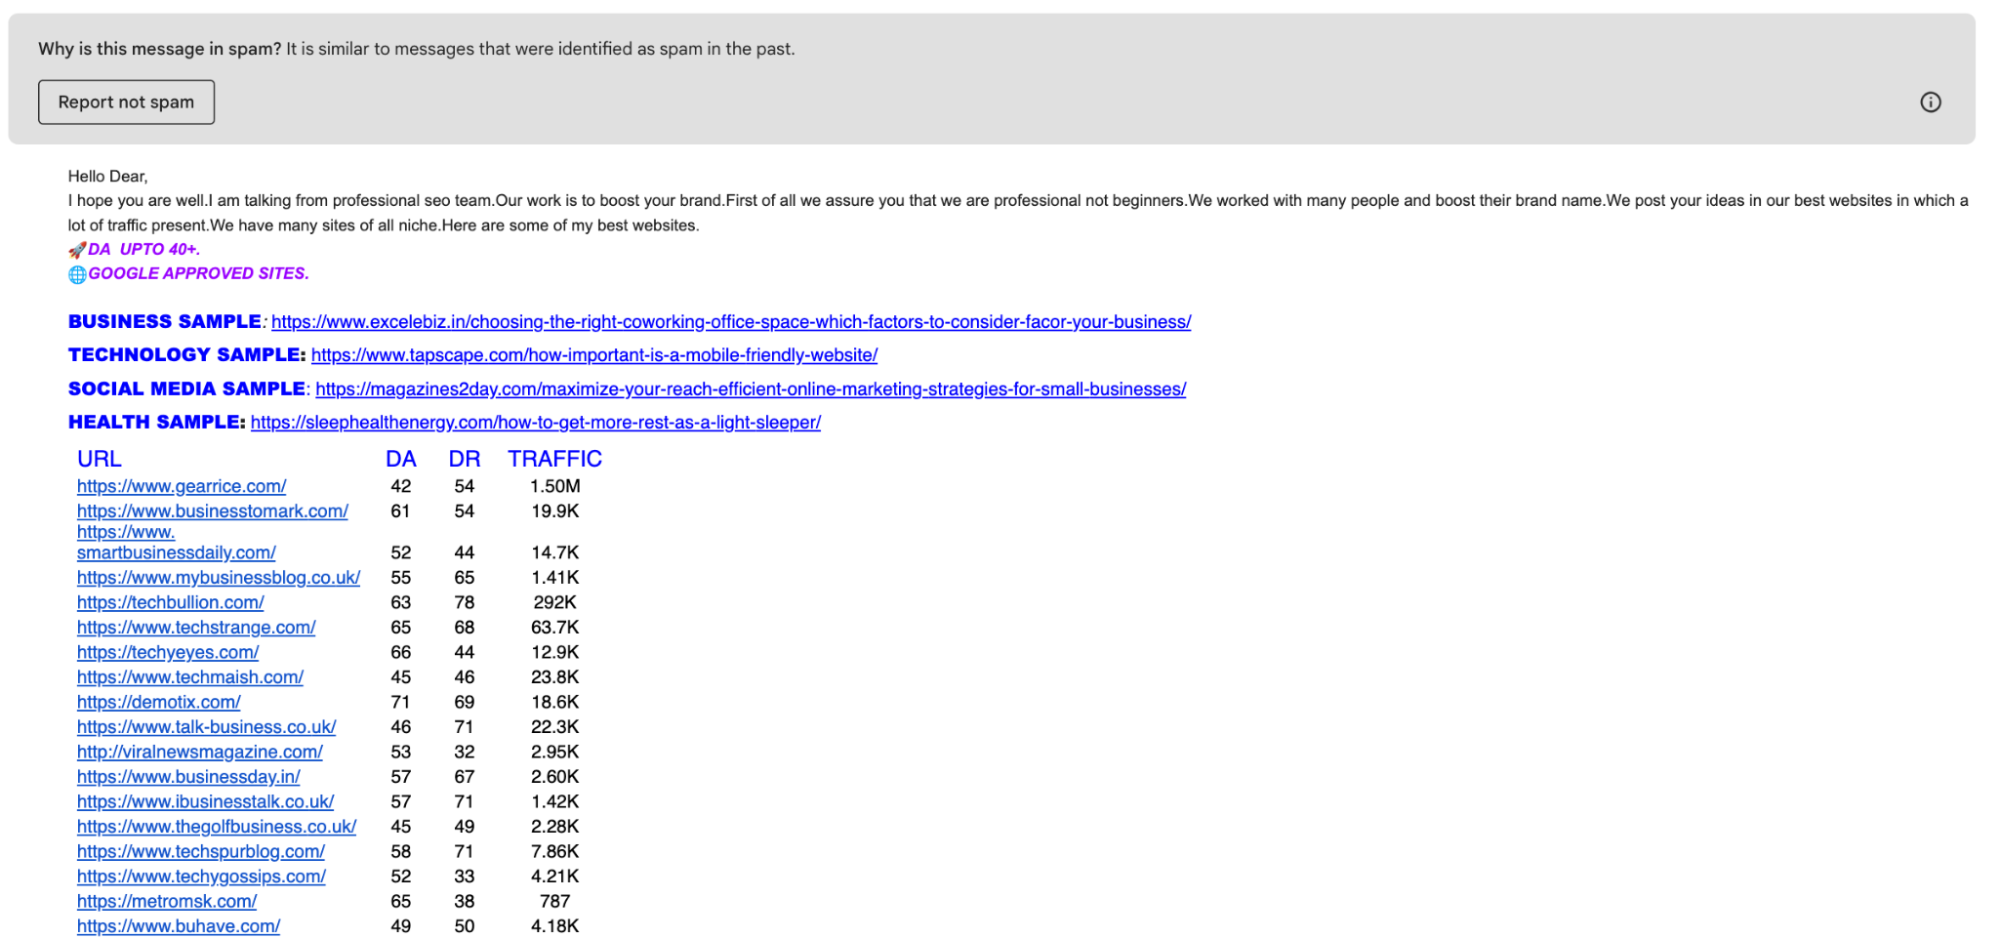 An example of a cold email which landed in spam because it's structured like spam, containing a large number of links